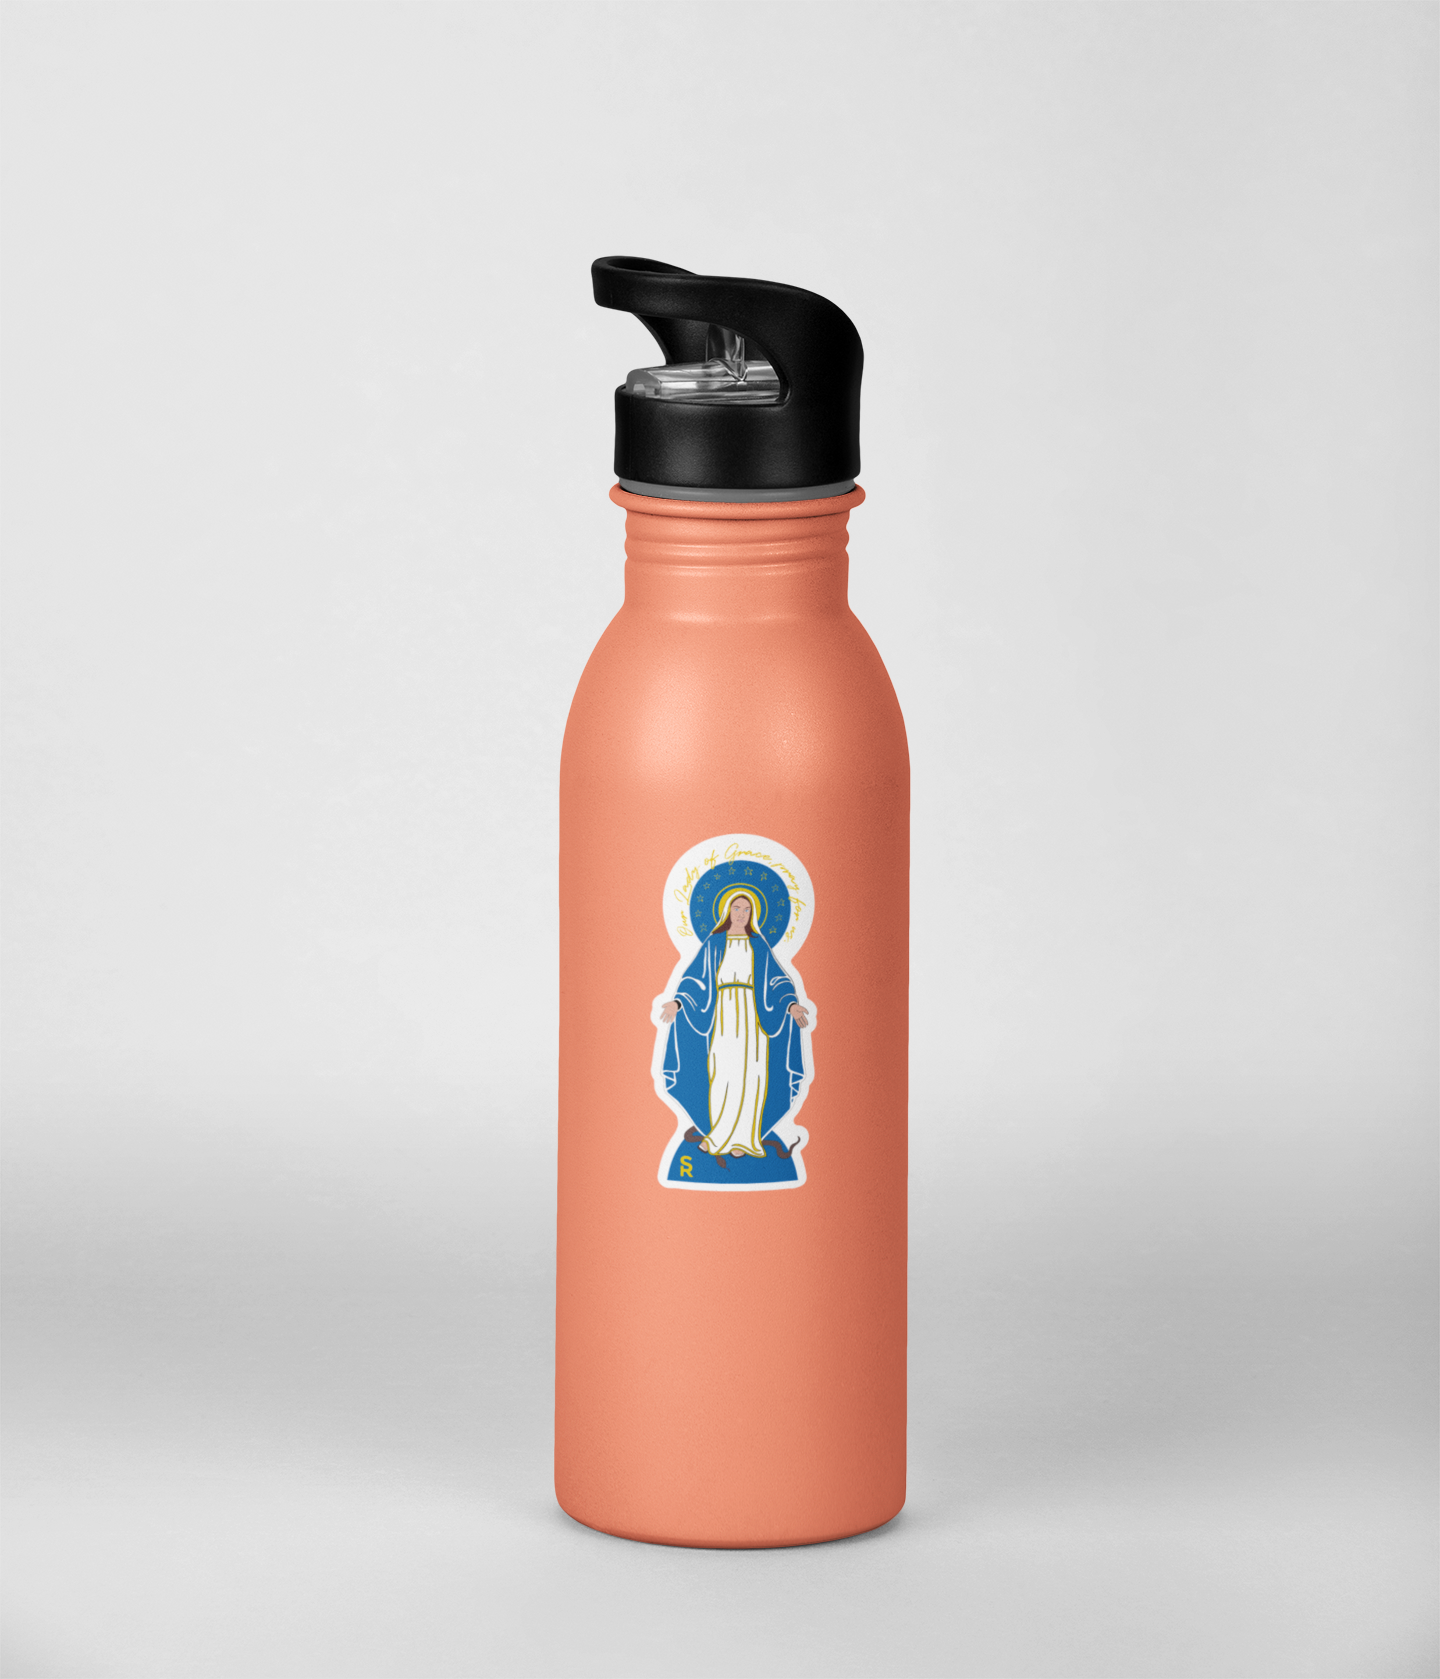 Our Lady of Grace Sticker 10-pack